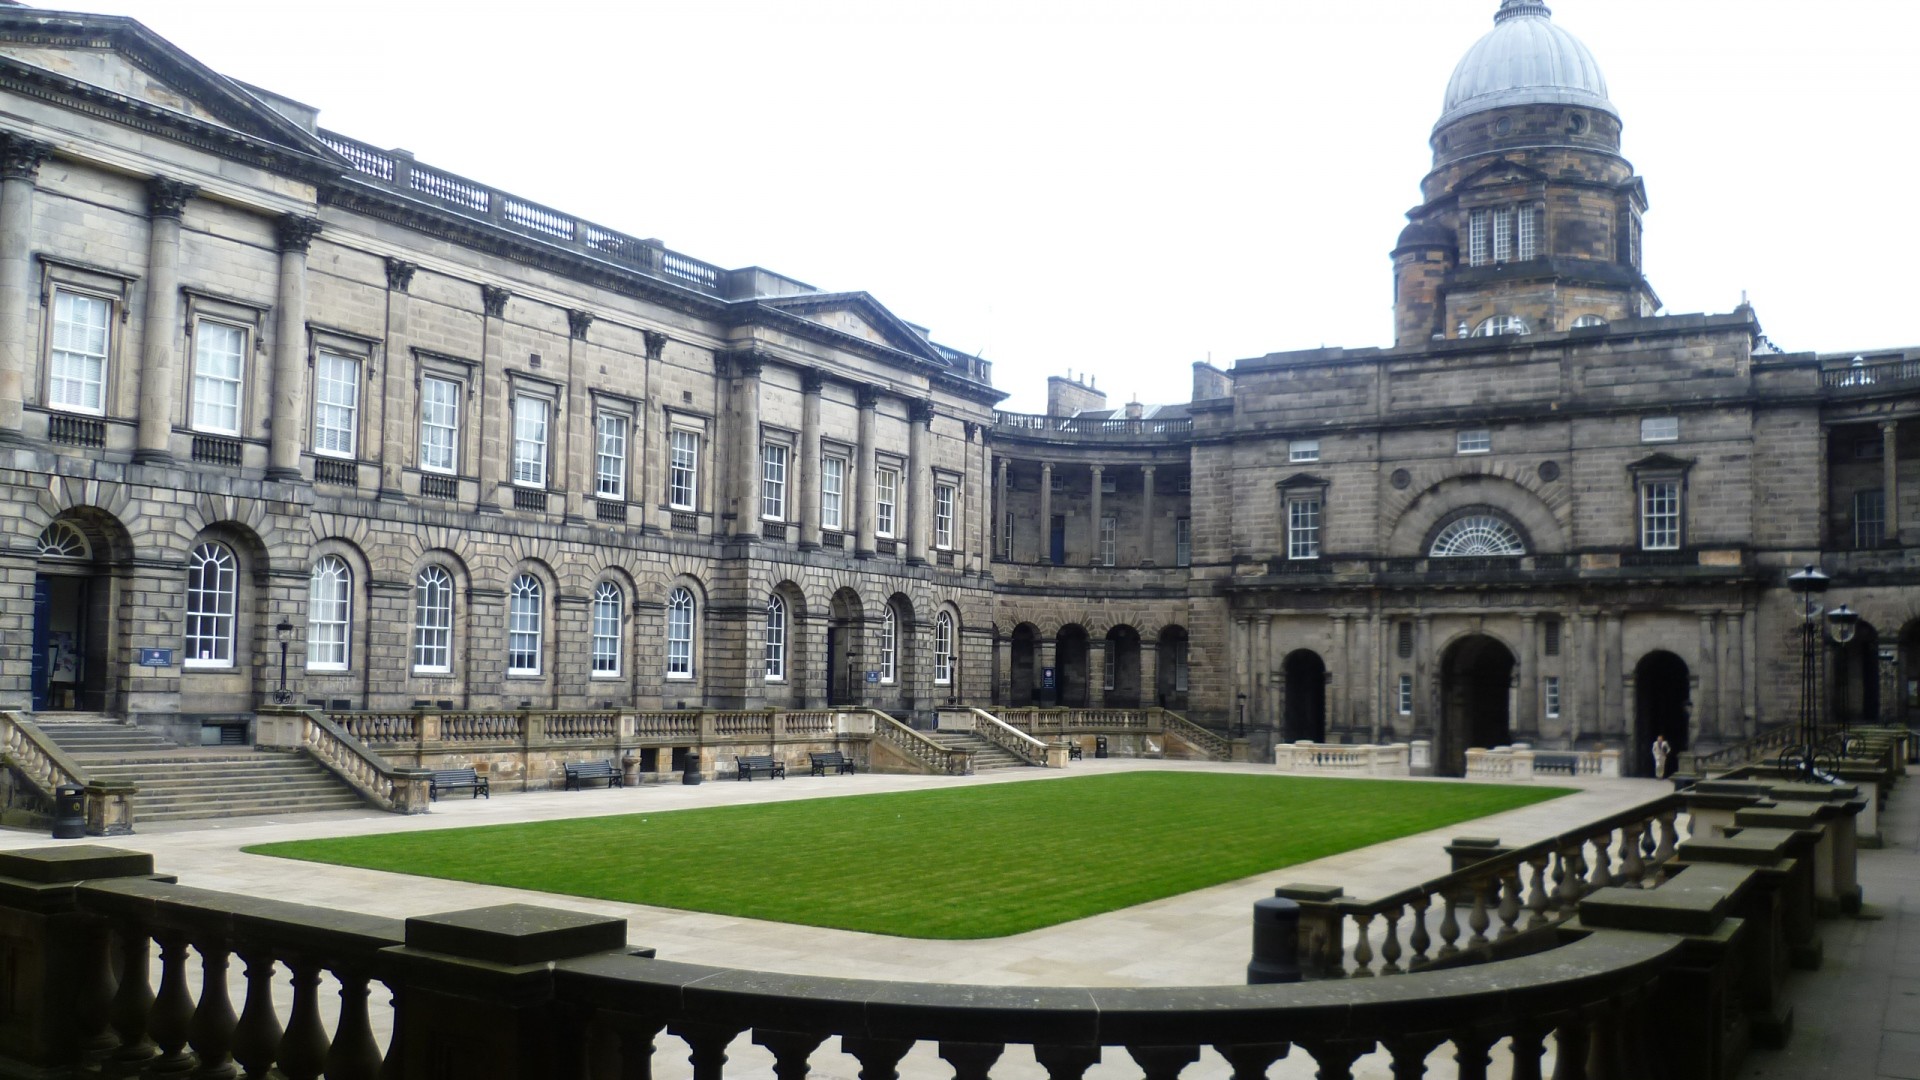 1920x1080 Download now full hd wallpaper university of edinburgh yard ancient dome  scotland travel attractions ...